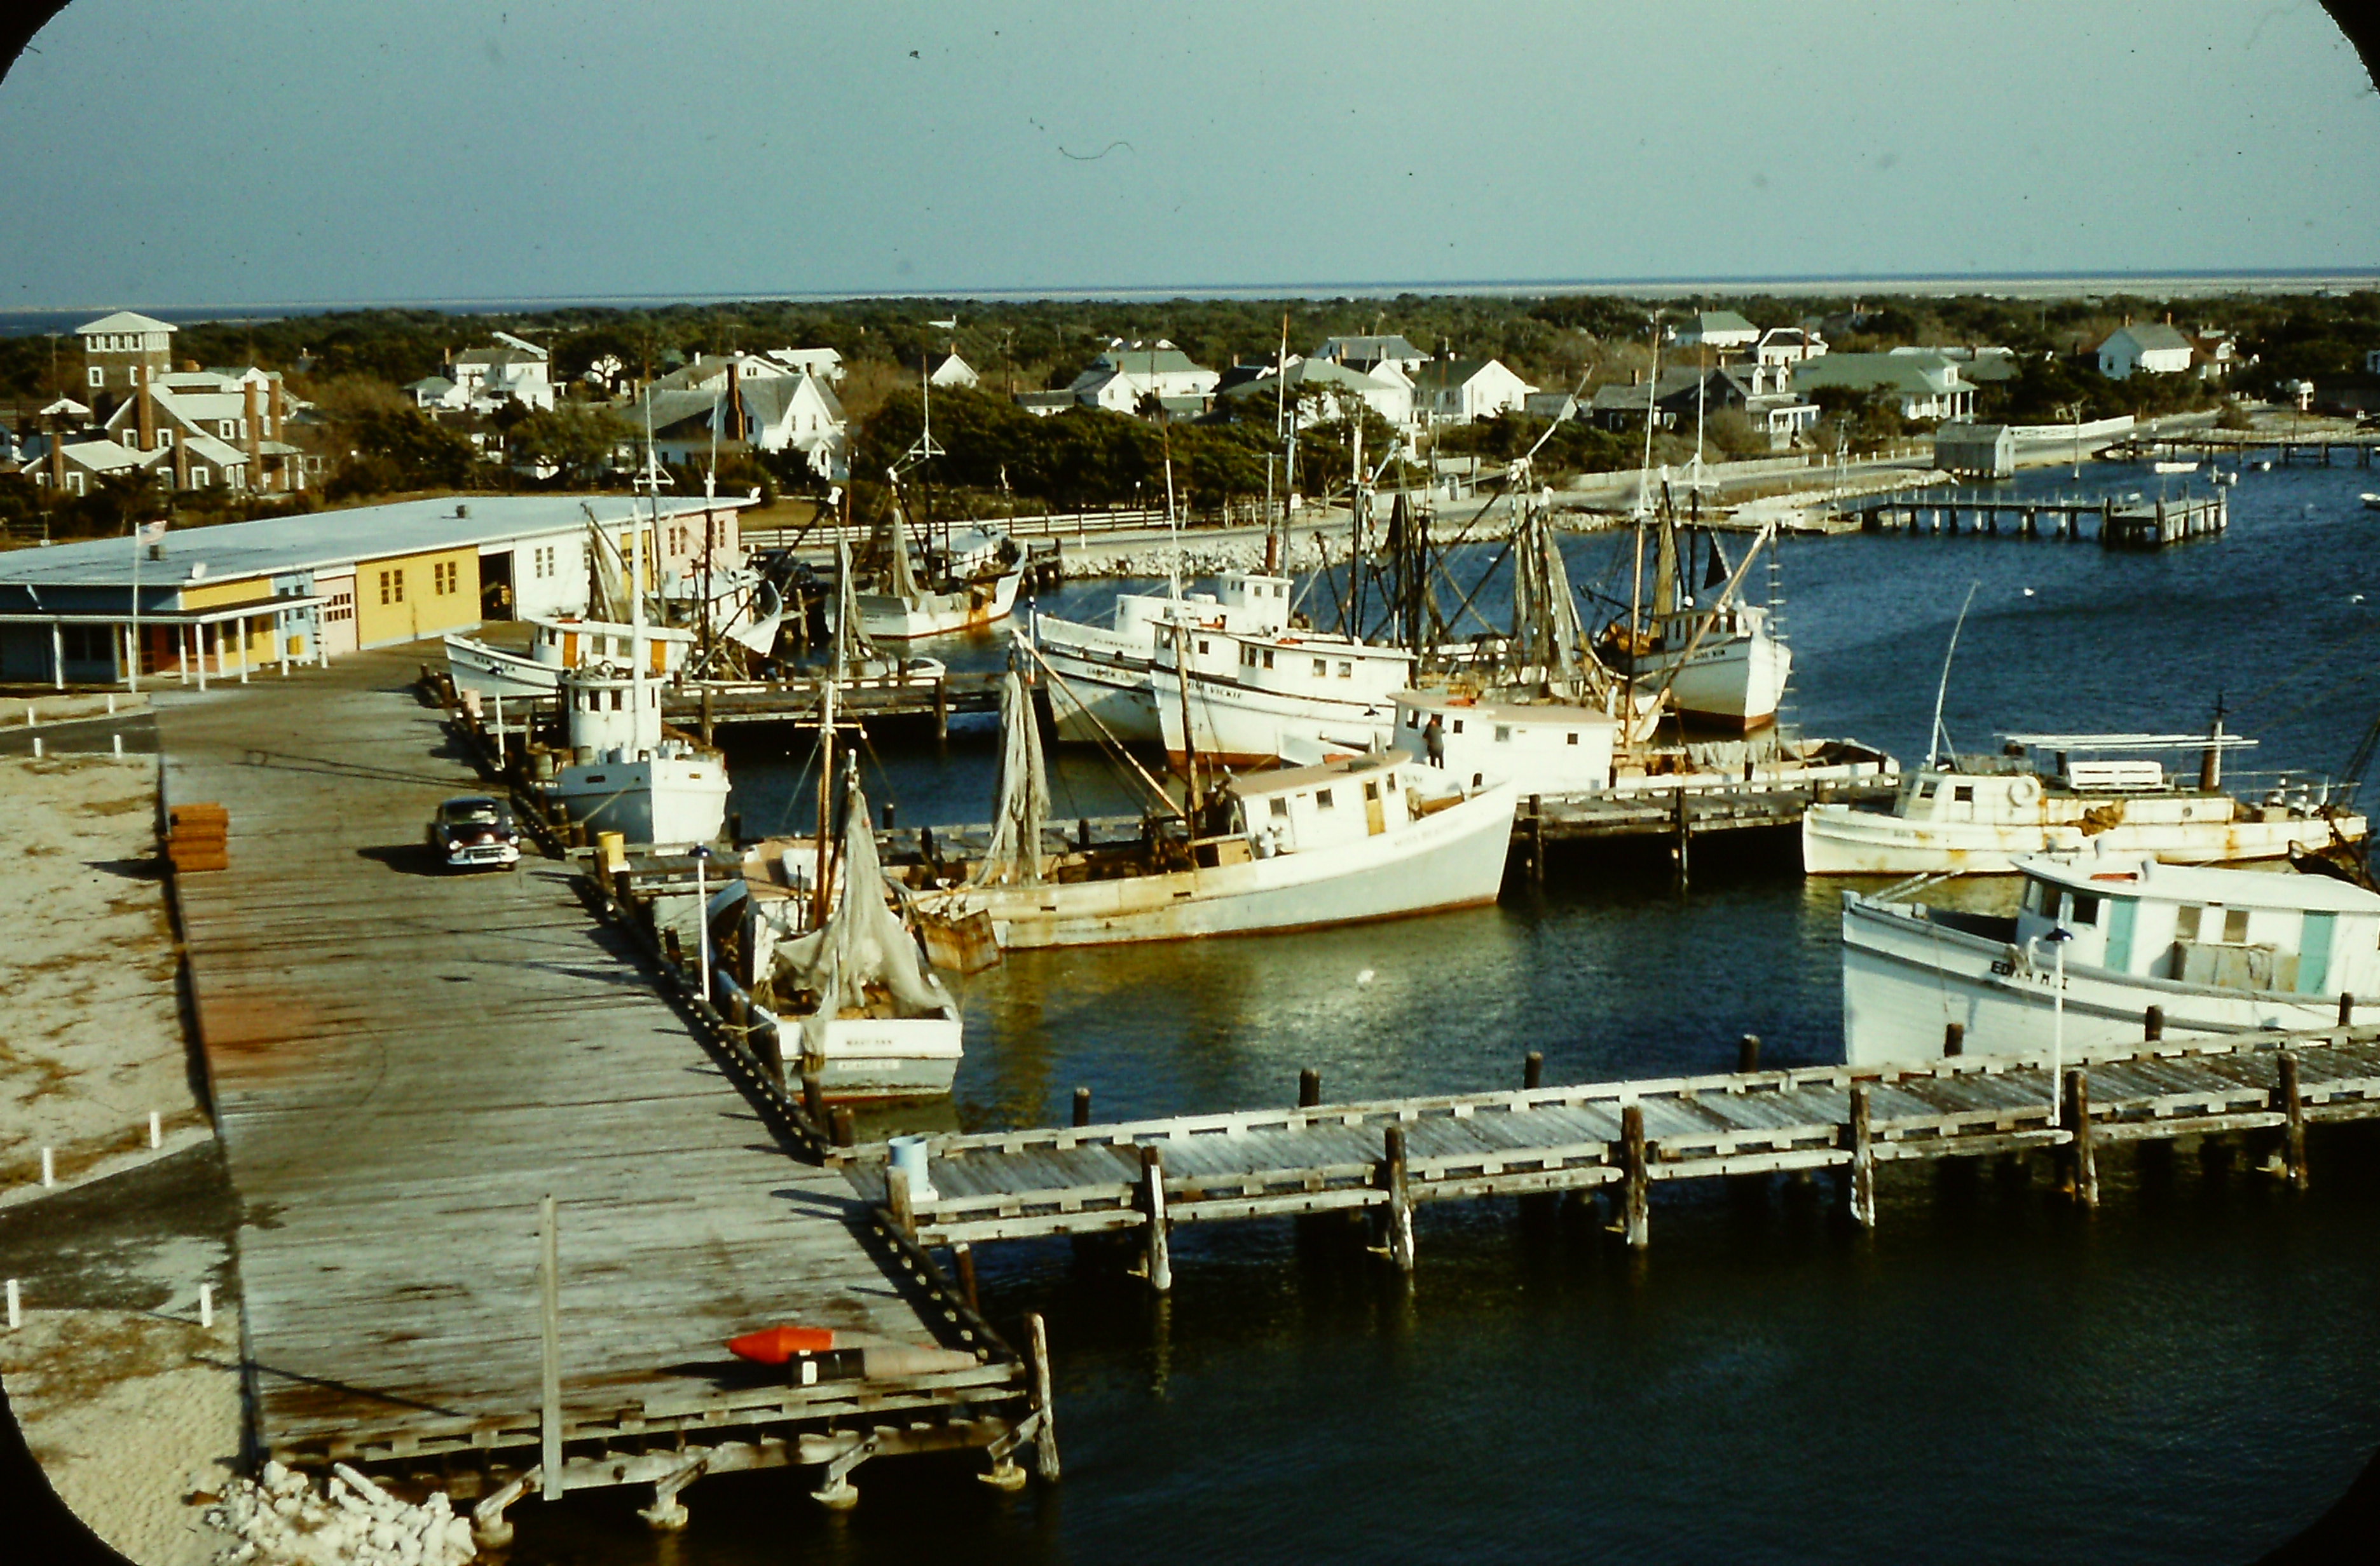 An aerial view of the old Navy docks and the first NPS visitor center at Silver Lake Marina on Ocracoke Island.